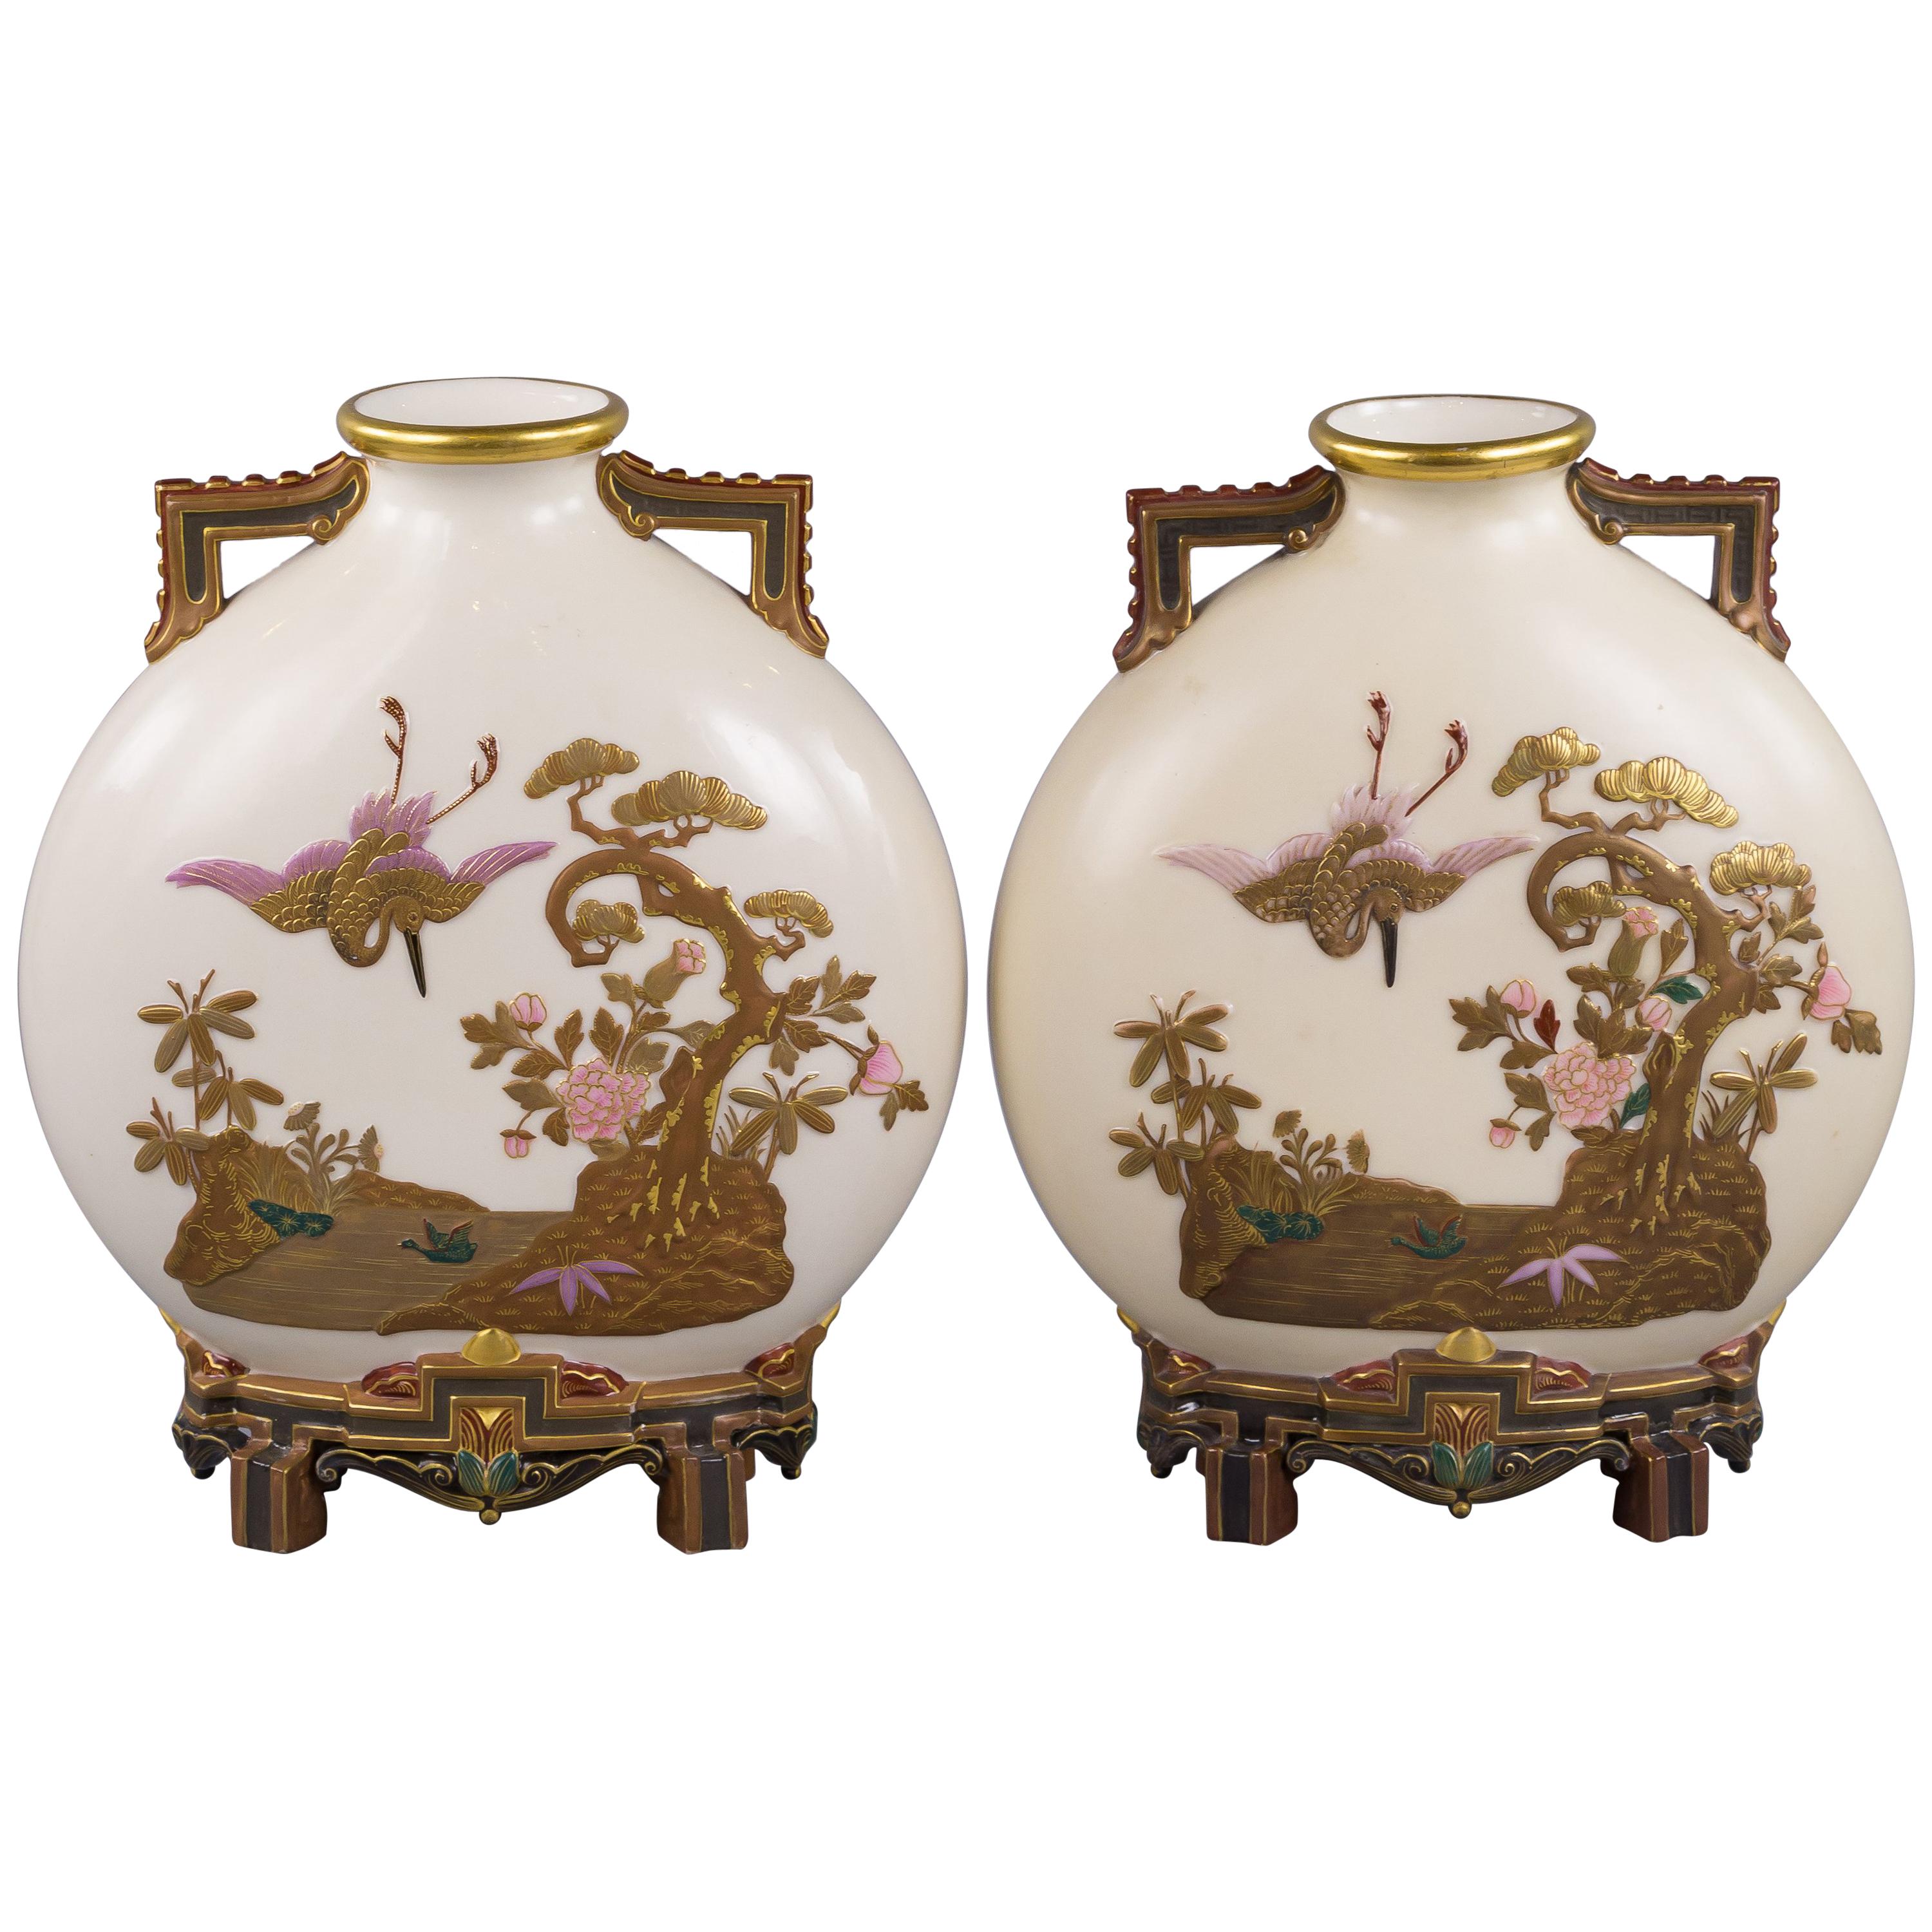 Pair of English Porcelain Moon Flask Vases, Royal Worcester, circa 1880 For Sale